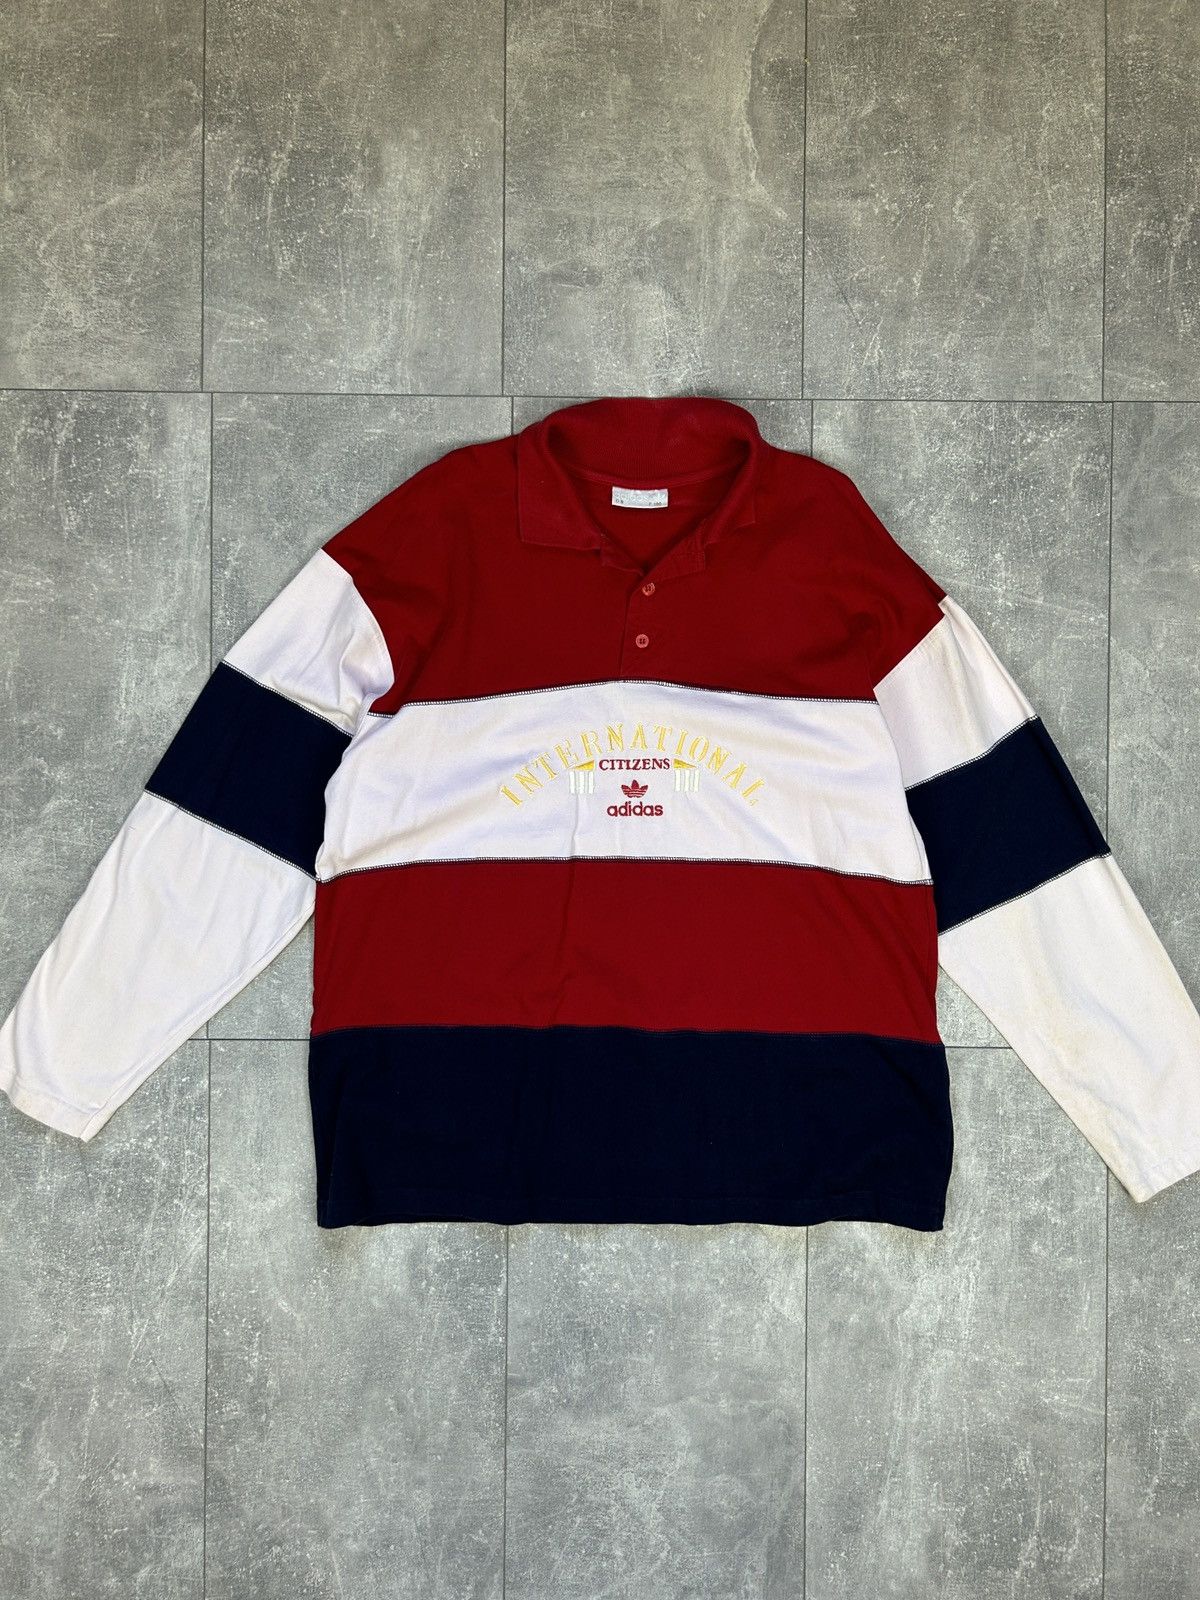 Pre-owned Adidas X Vintage Mens Vintage Adidas International Citizens Longsleeve In Navy/red/white